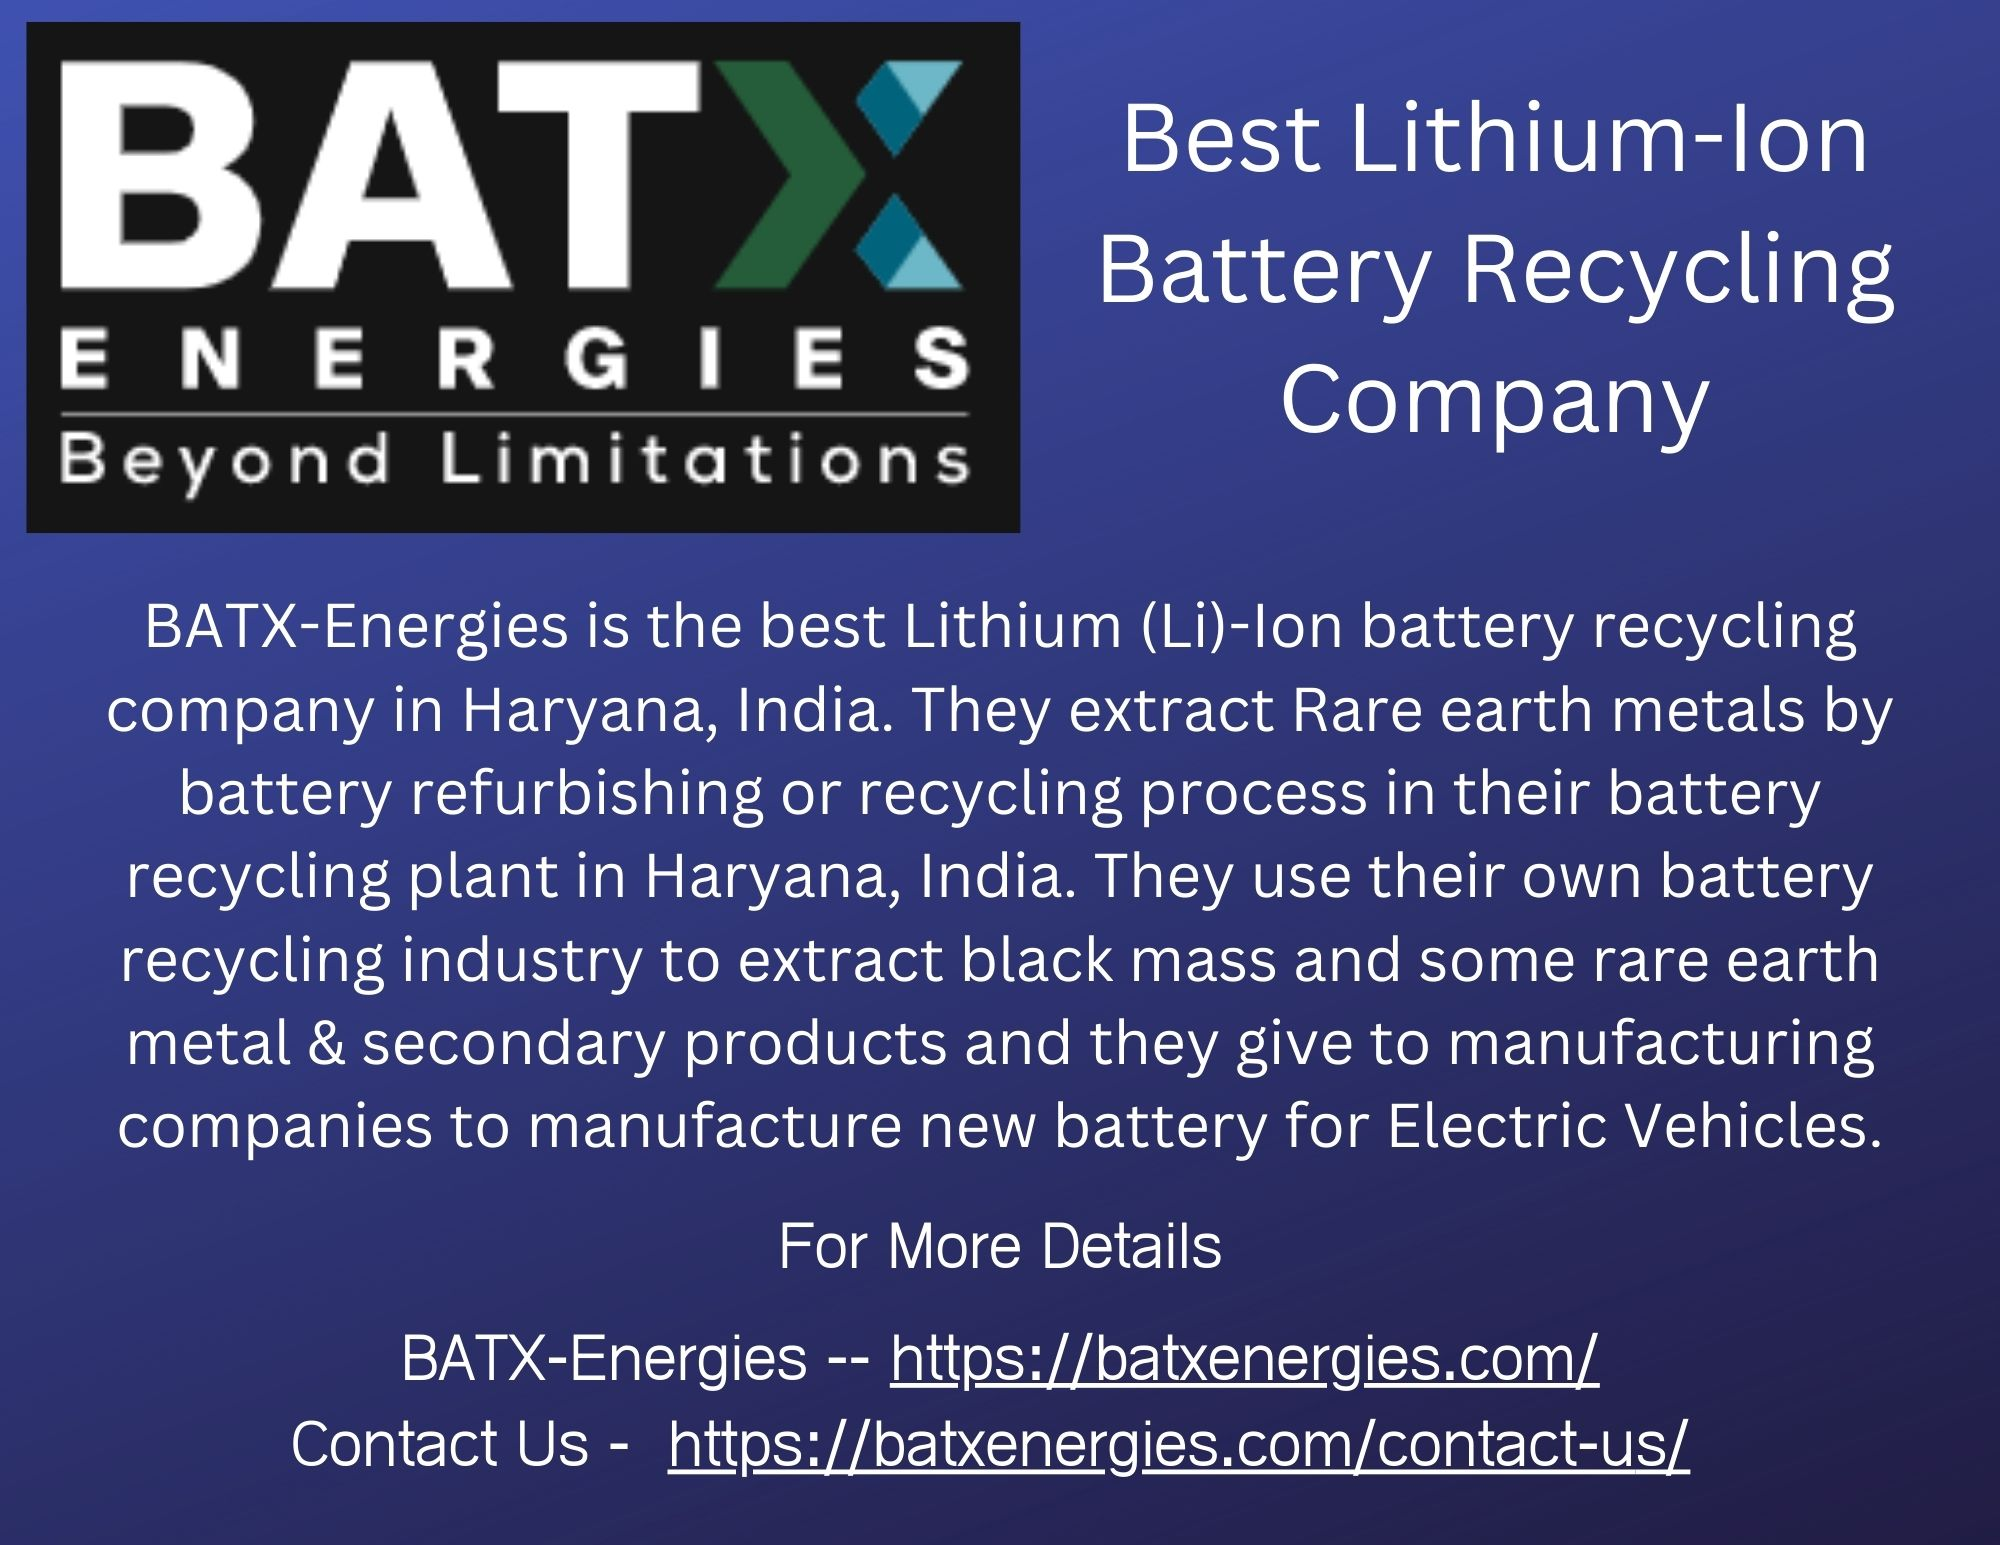 Best Lithium-Ion Battery recycling Company'